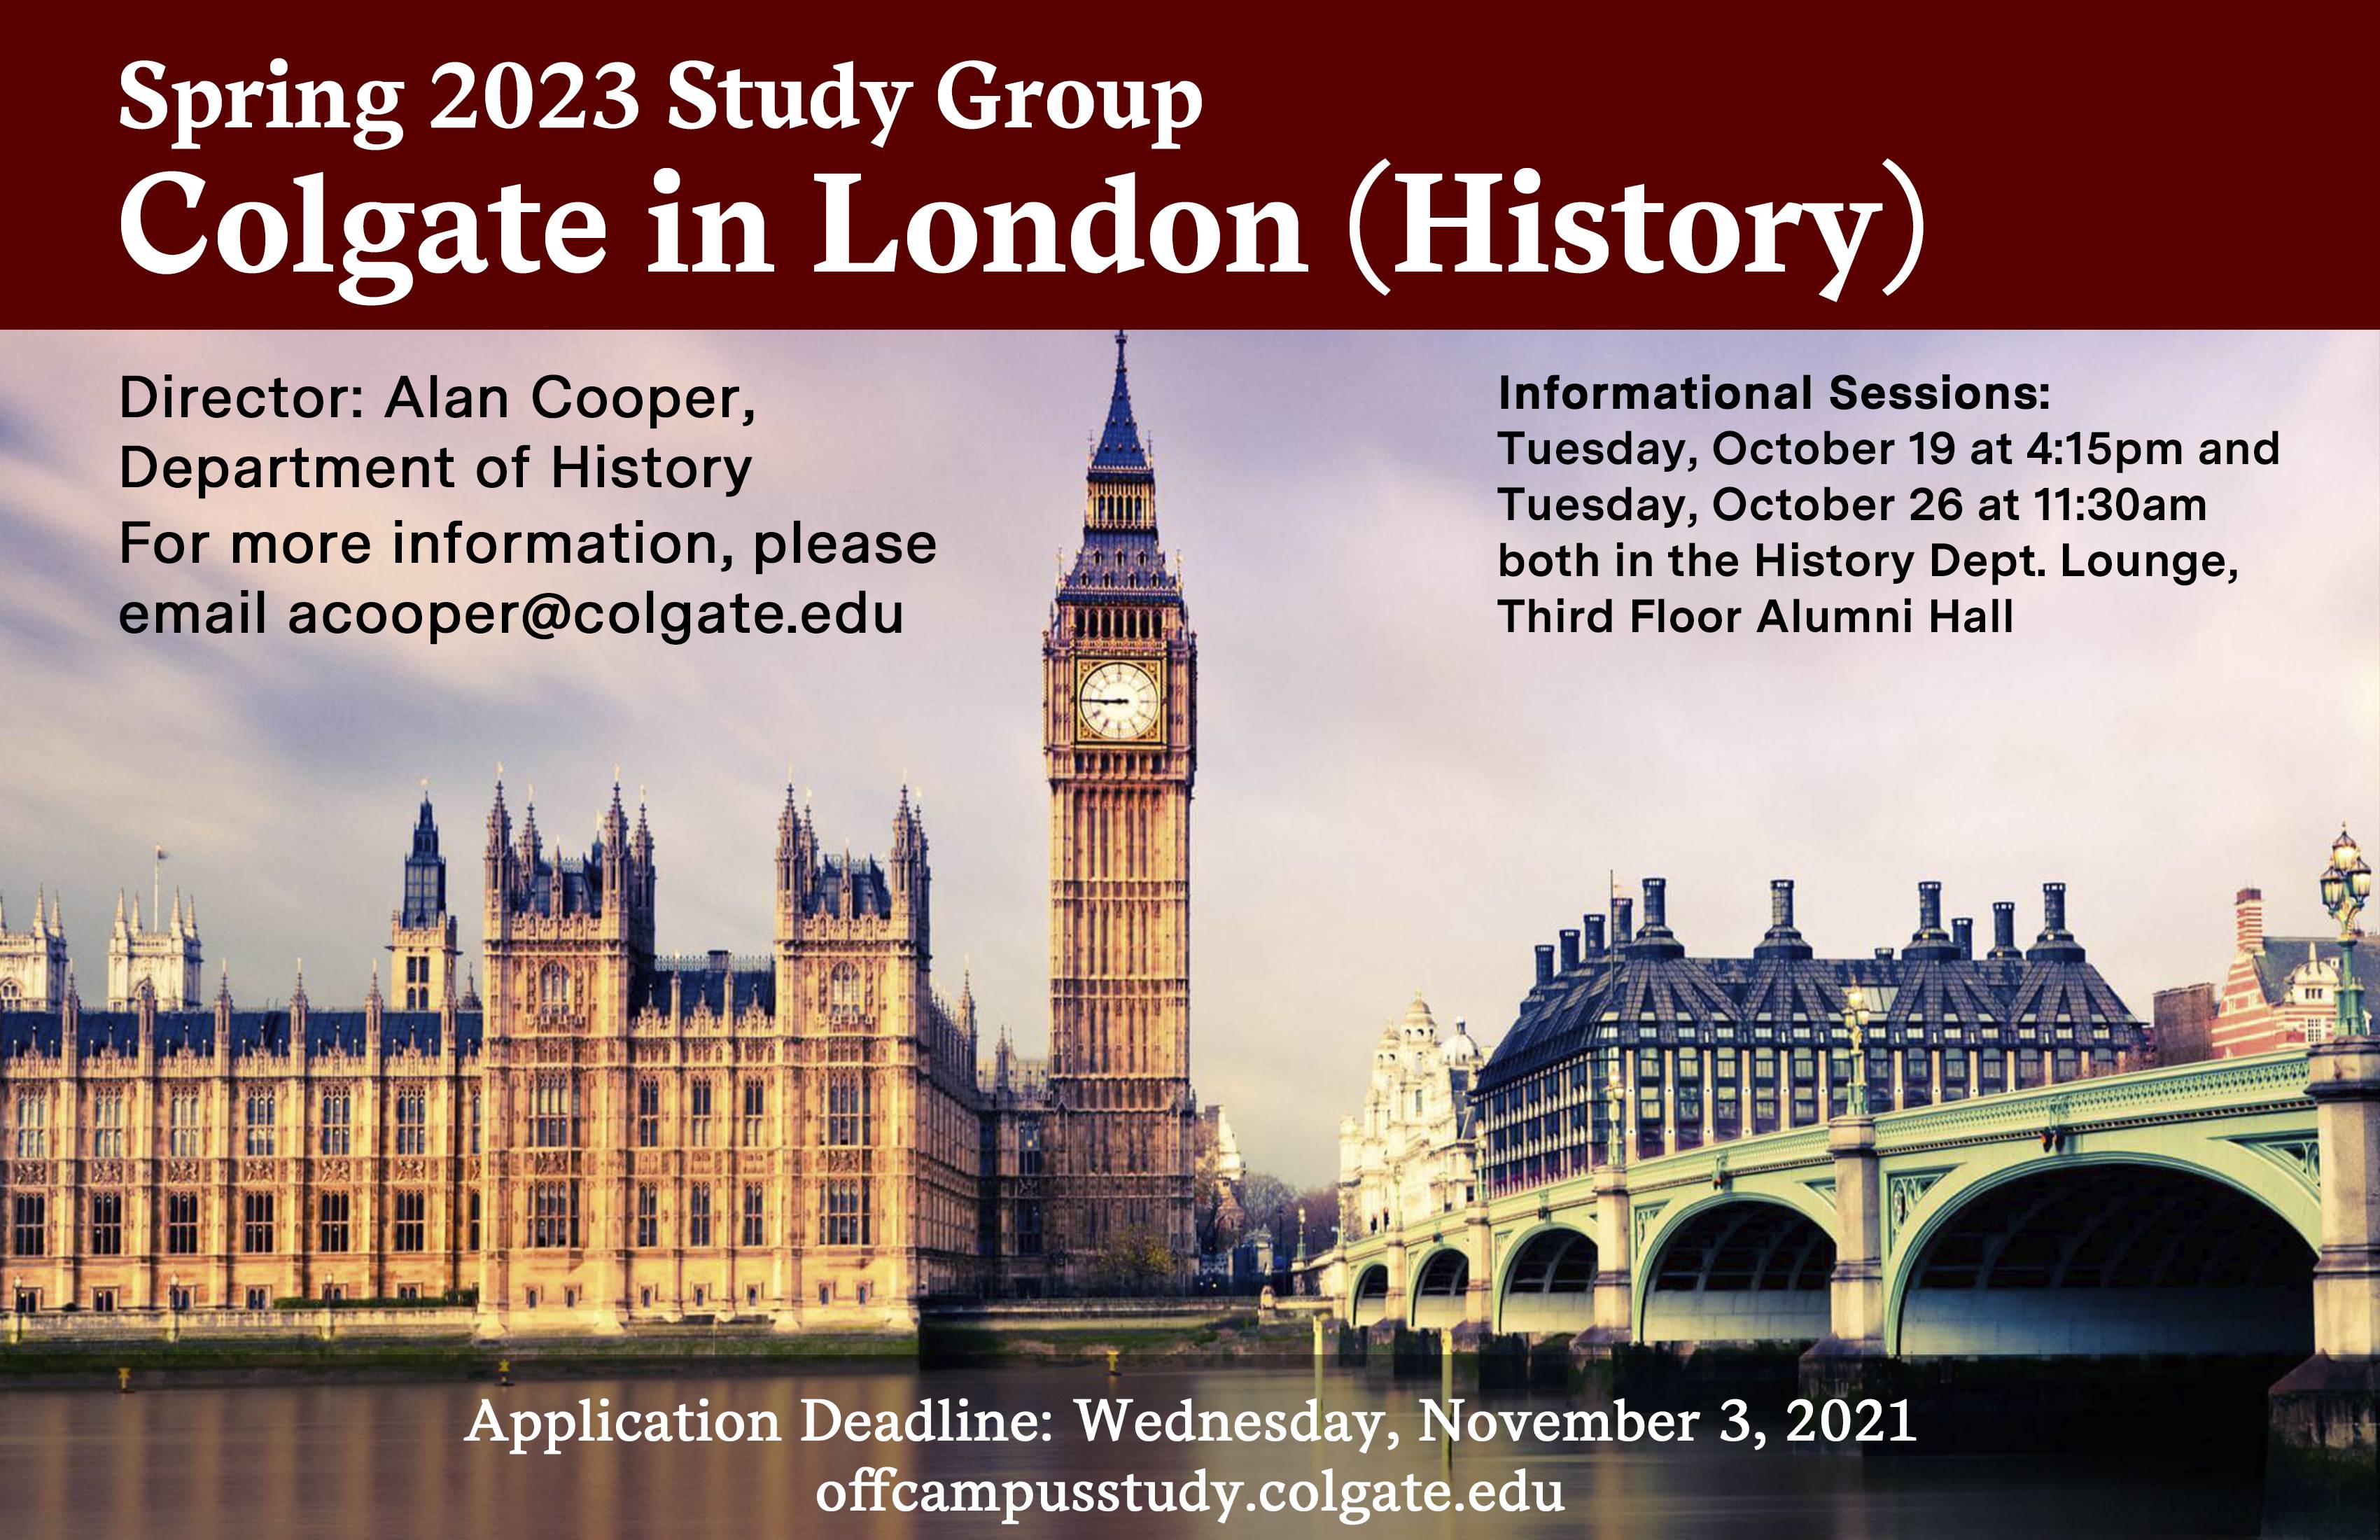 Spring 2023 London History Study Group Poster